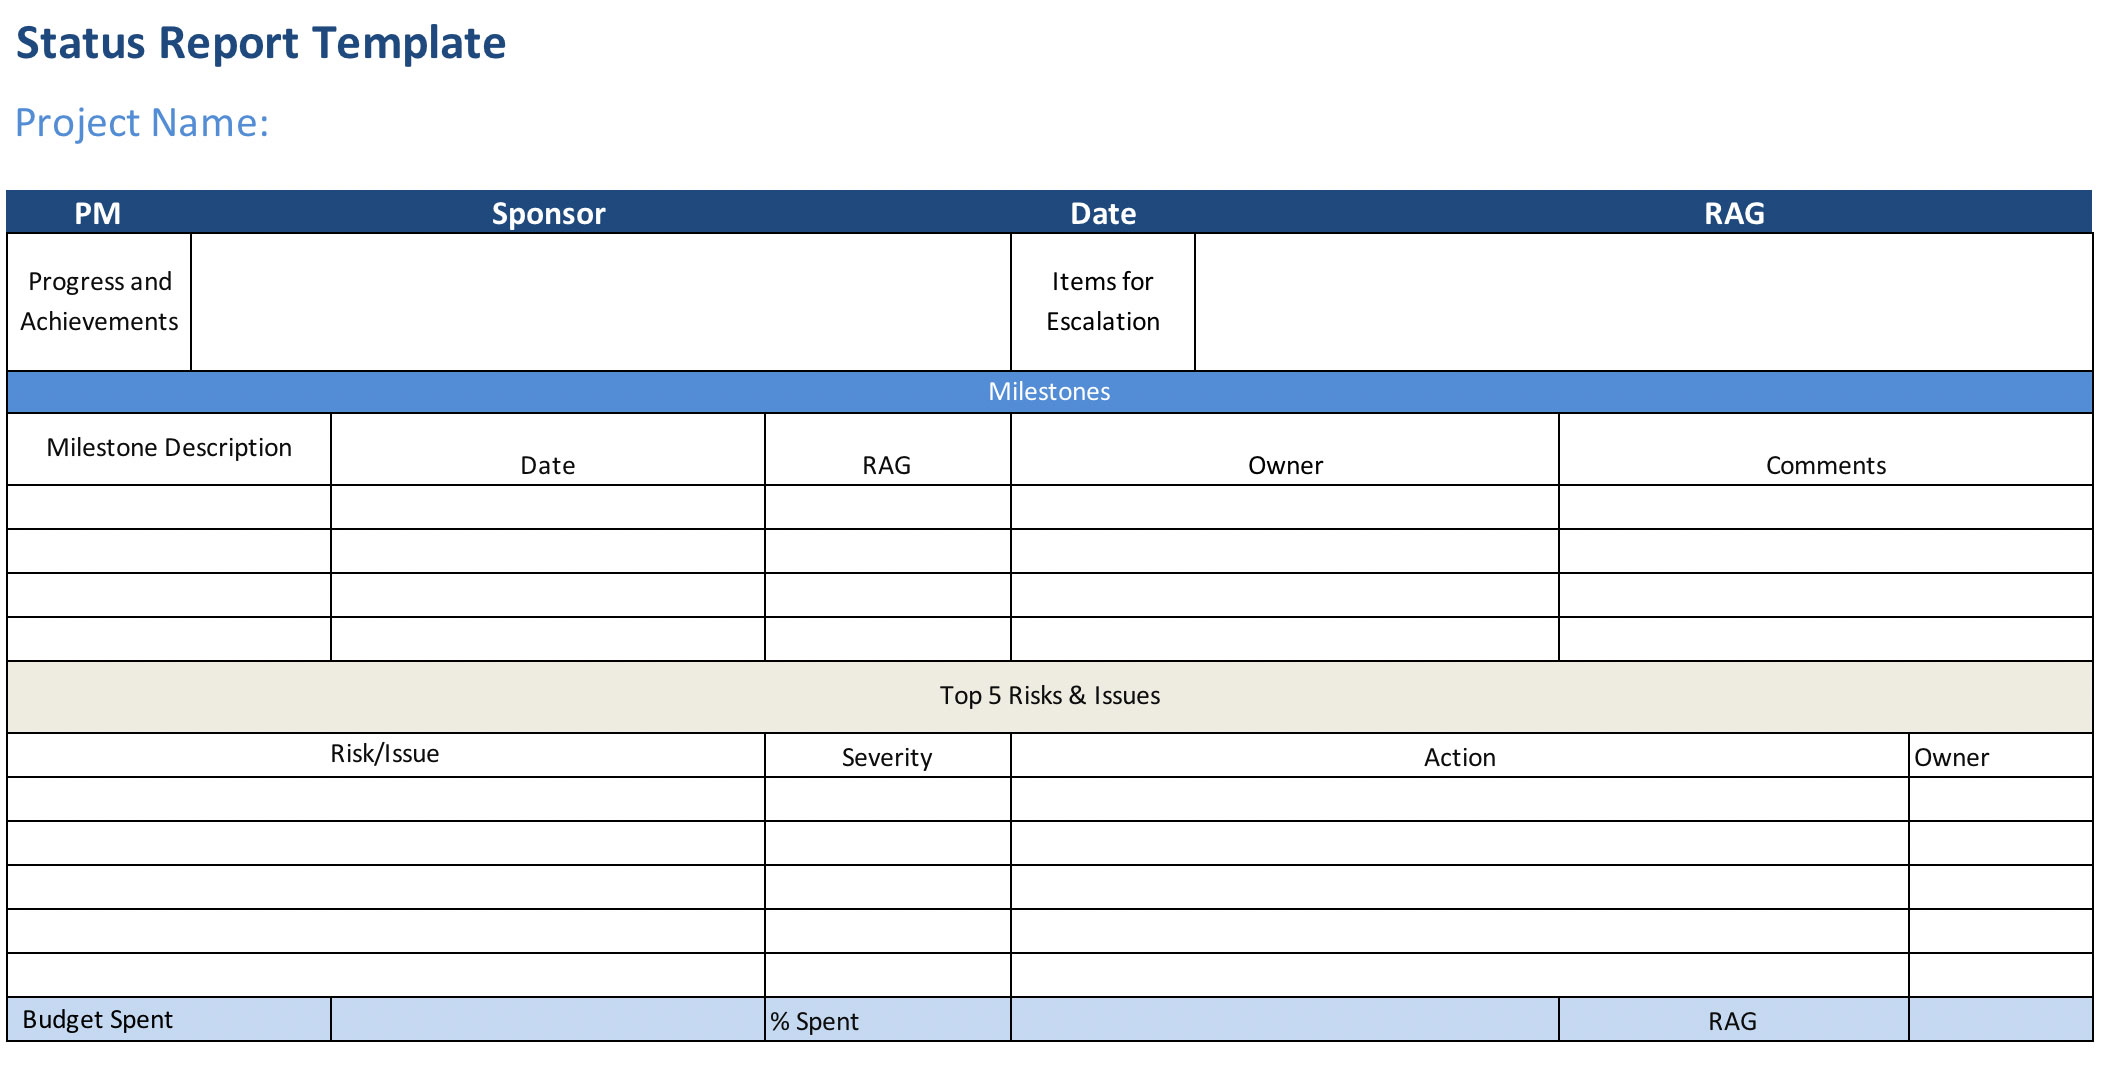 Project Status Report (Free Excel Template) - ProjectManager.com Intended For One Page Status Report Template